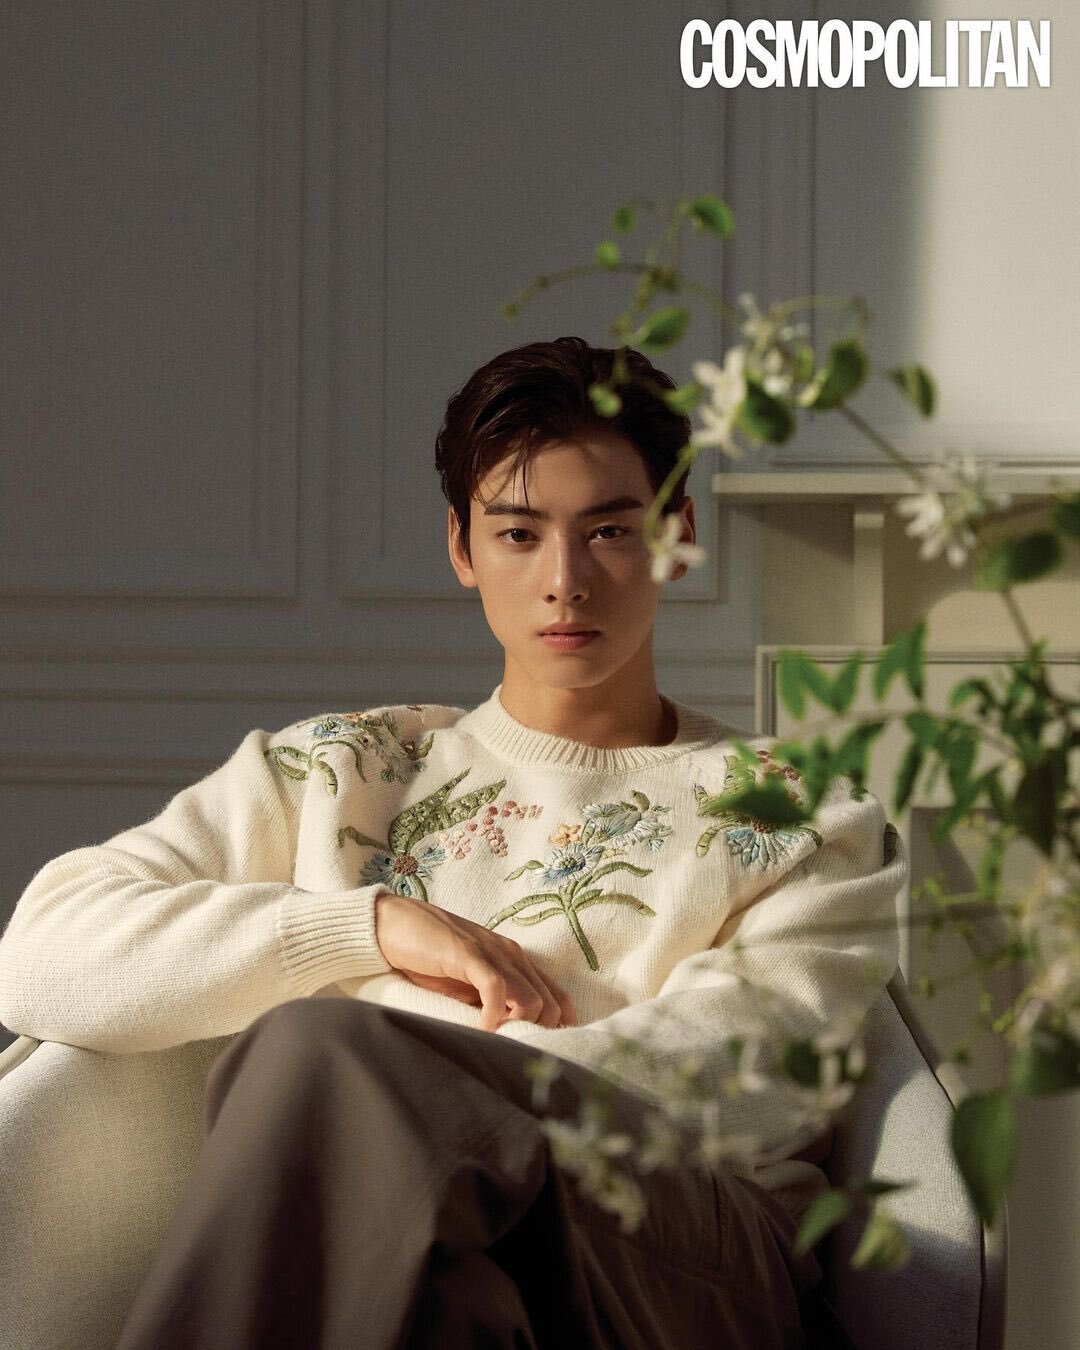 ASTRO's Cha Eun Woo is flawless for 'Dior Beauty' on the cover of